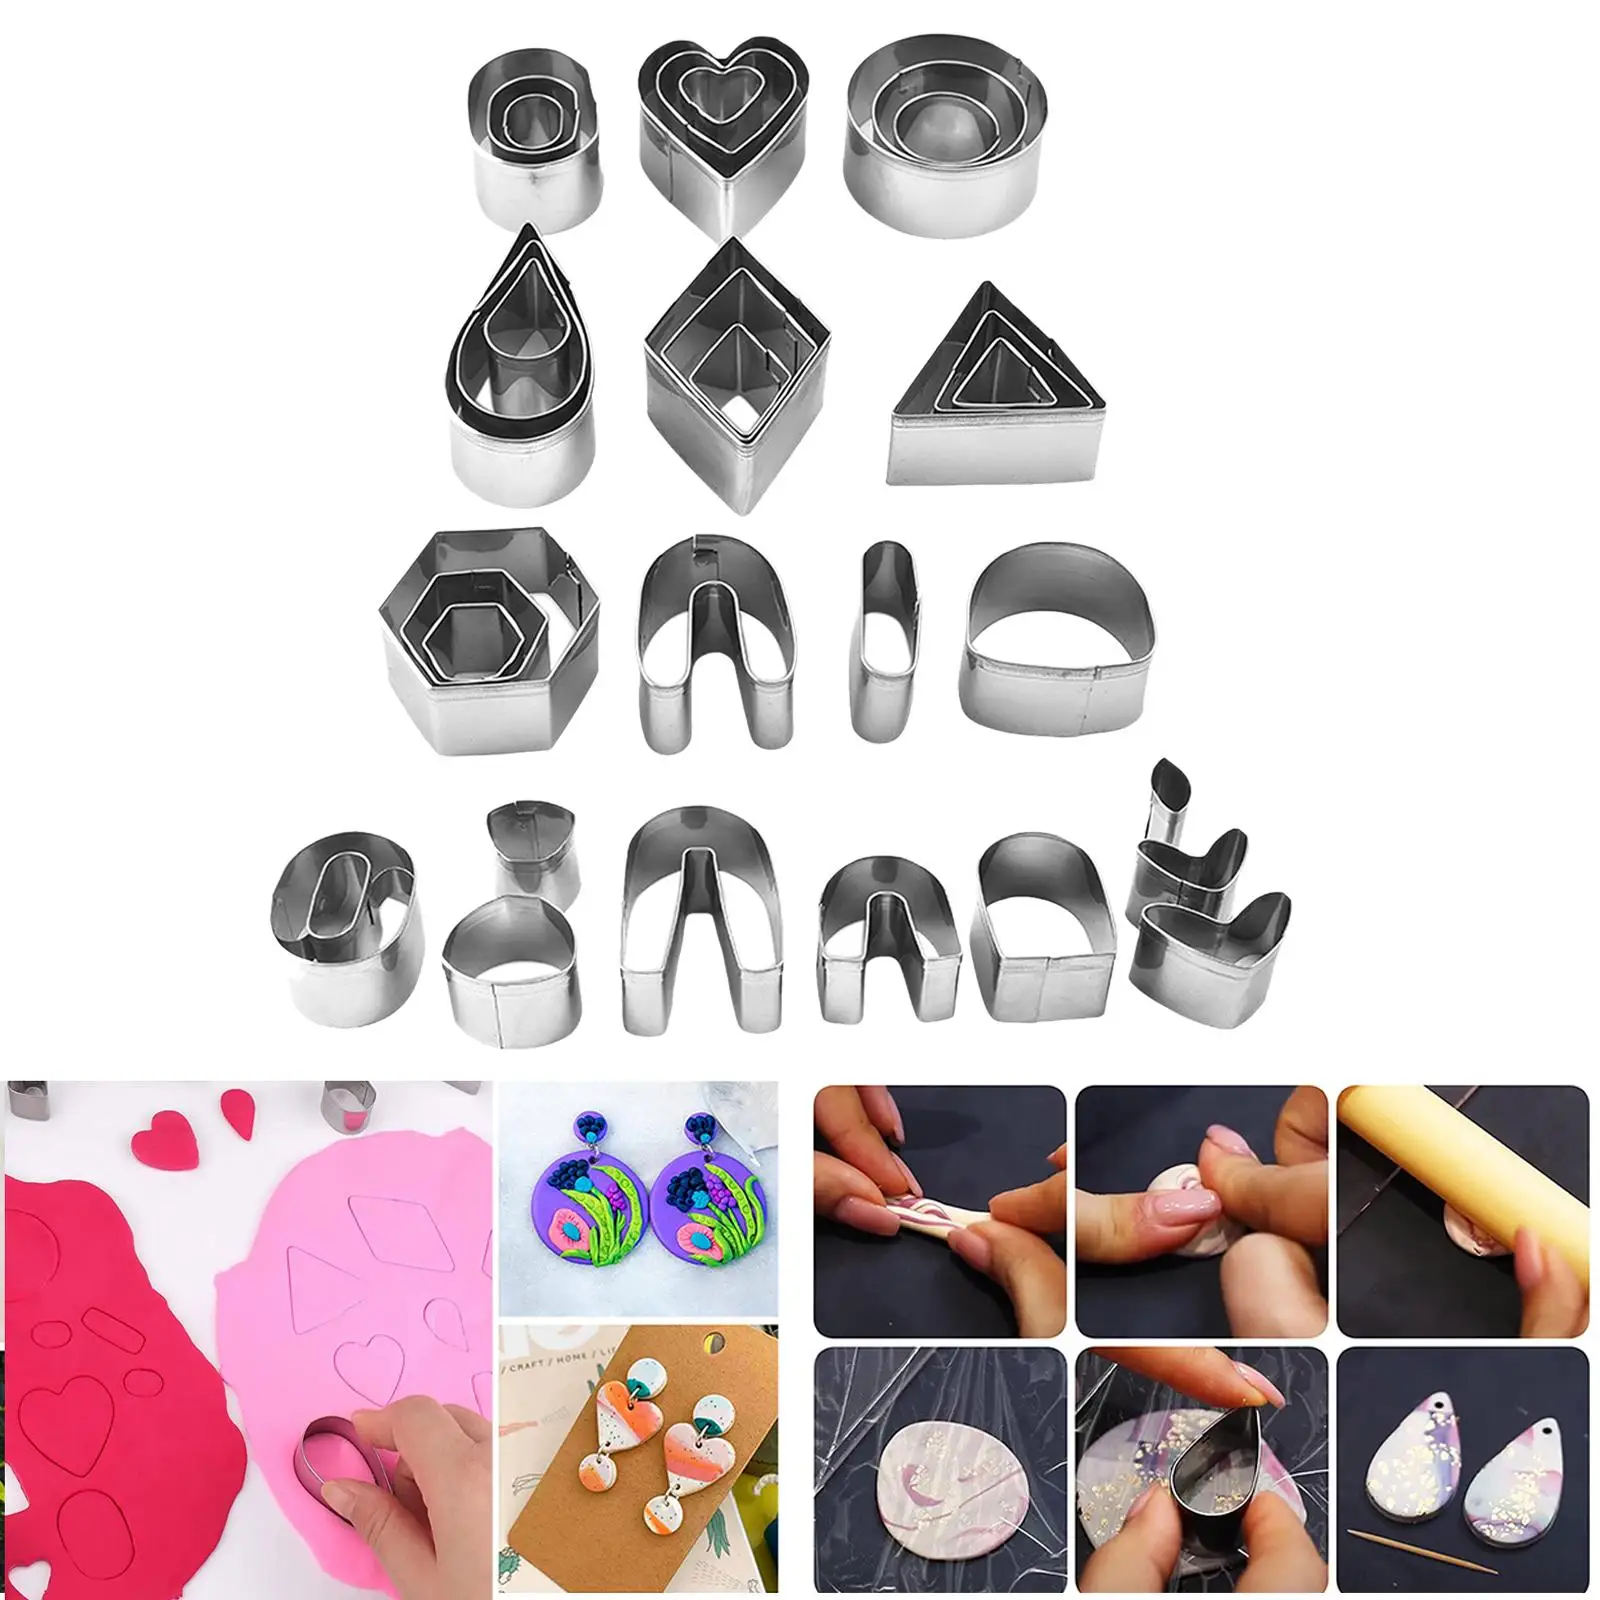 33 Pieces Polymer Clay Handmade DIY Metal Starter Pack Mini Shapes Cutter for Kitchen Homemade Baking Vegetable Earring